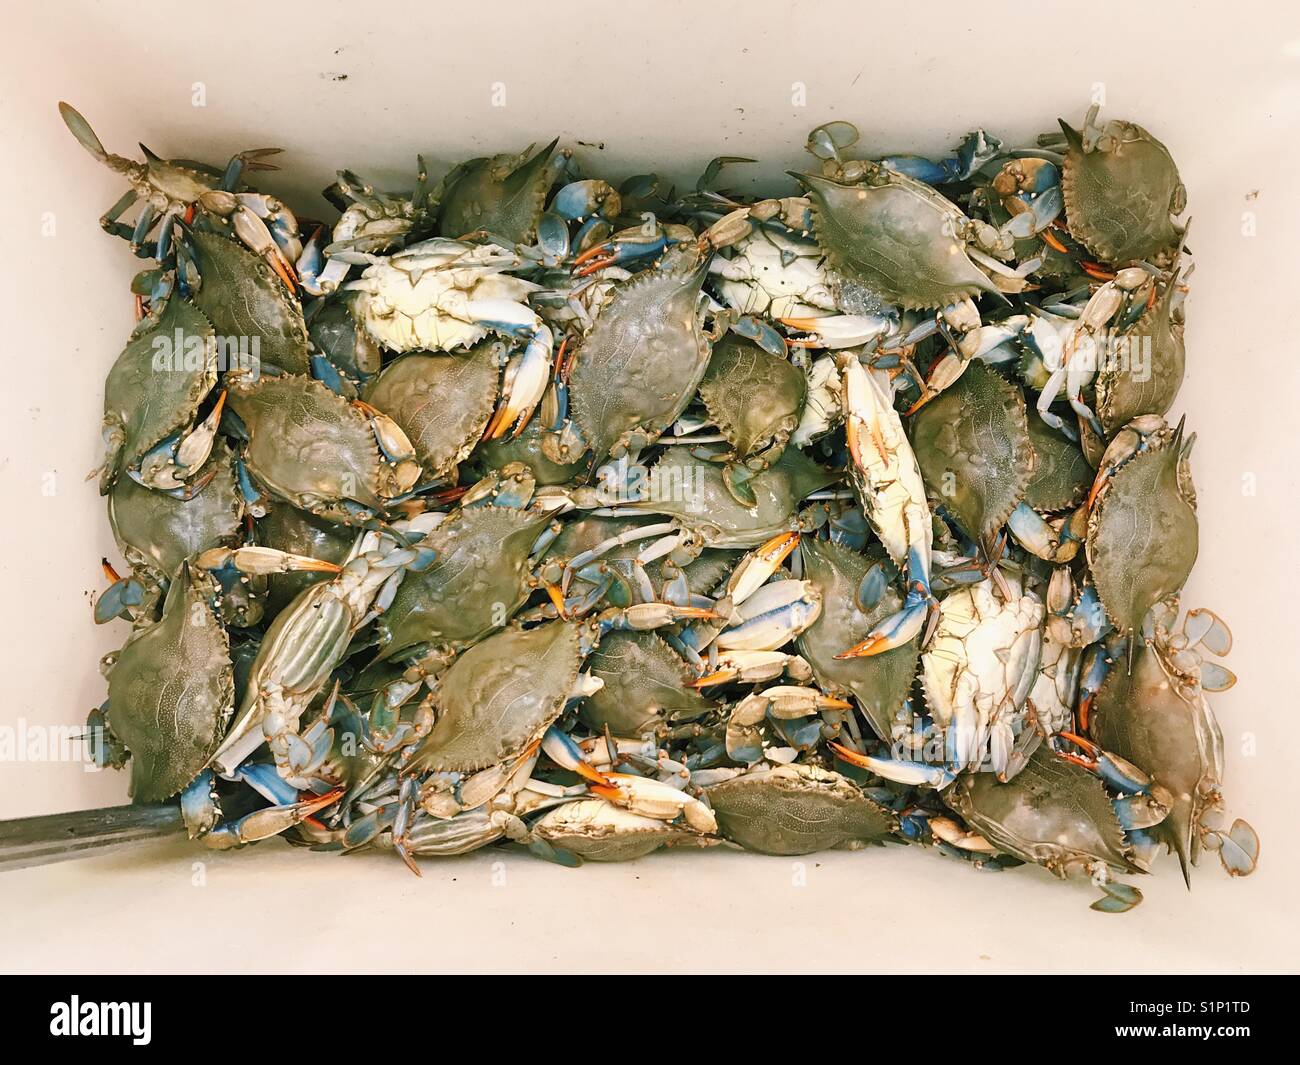 A box of crabs at a Korean seafood market in New Jersey, USA. Stock Photo